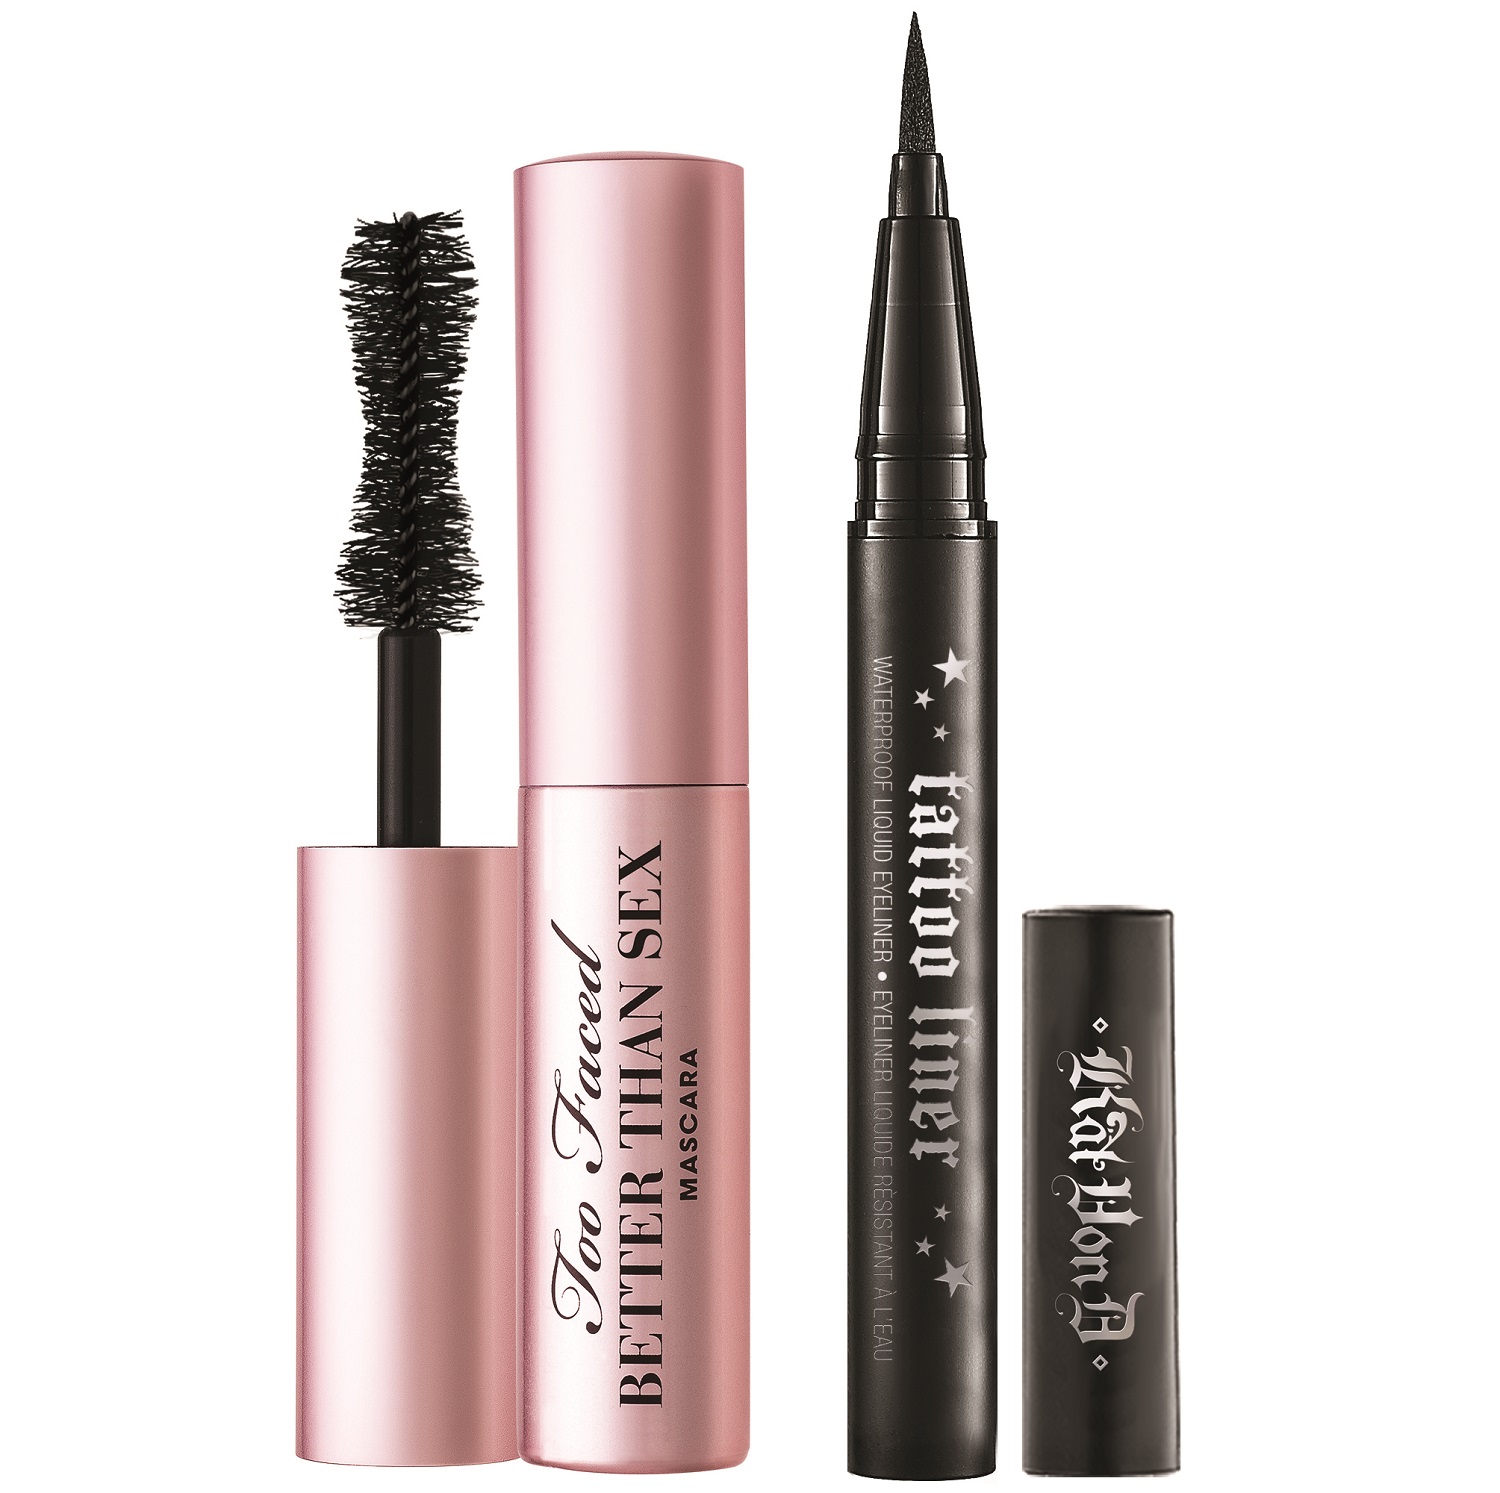 Better Together, Bestselling Mascara & Liner Duo (RM84)-Pamper.my